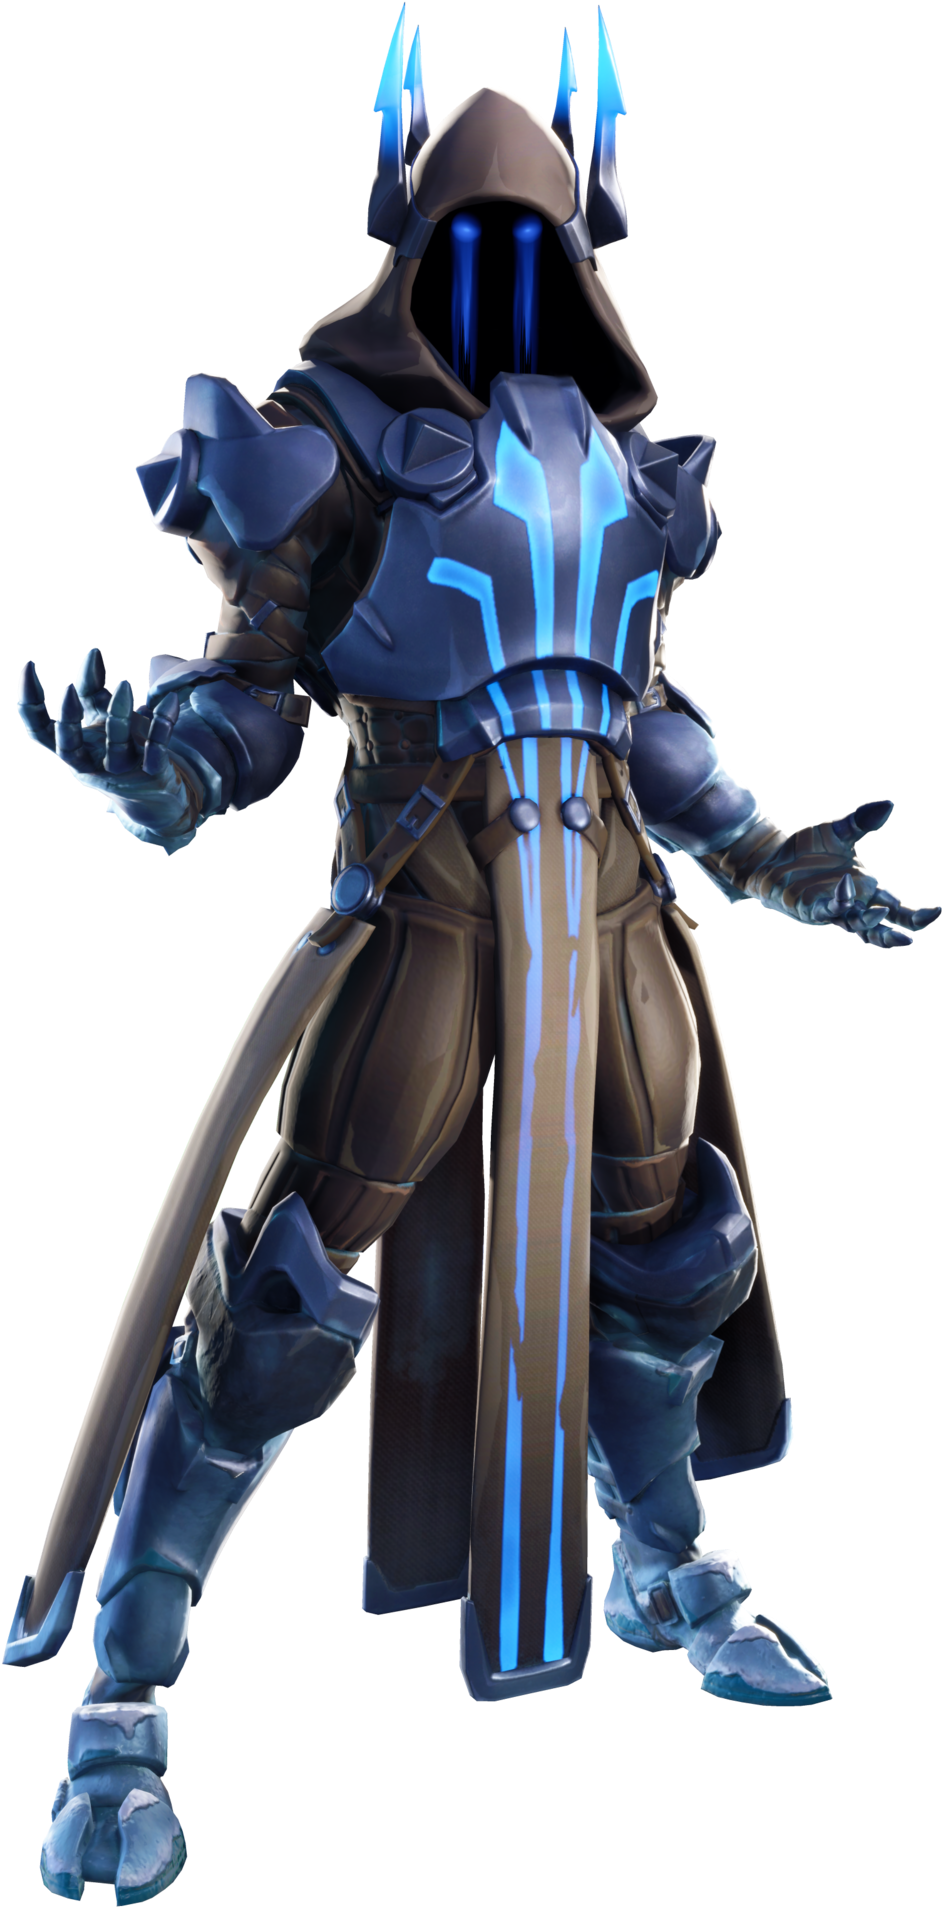 Fortnite Aura Png Transparent : Fortnite Dynamo Skin - Outfit, PNGs, Images - Pro Game Guides ...